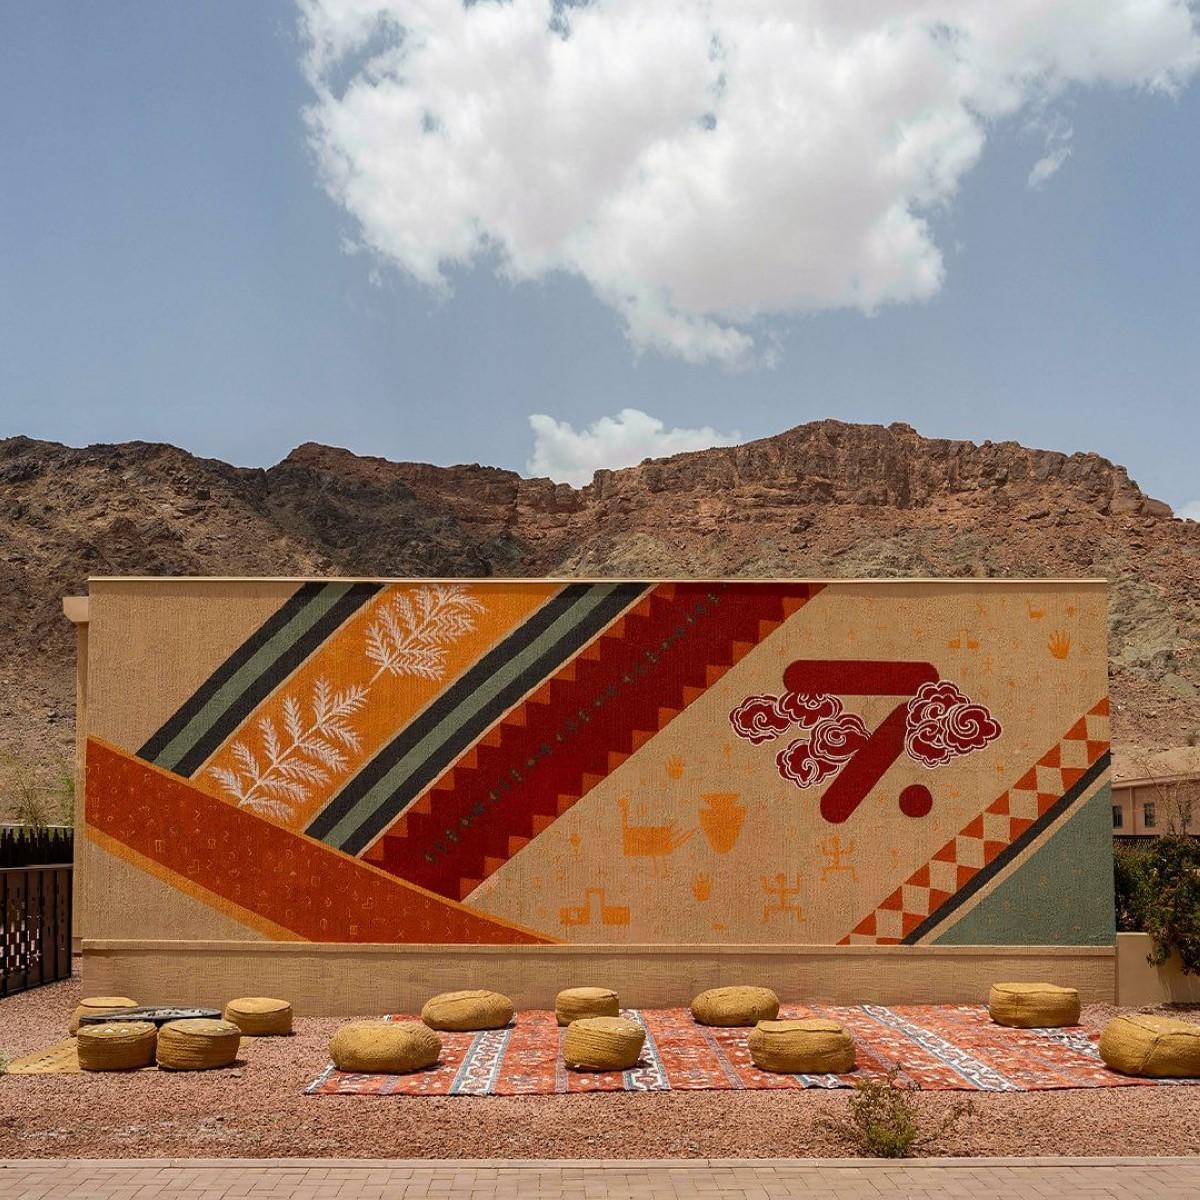 3 events and exhibitions confirmed for AlUla Arts Festival